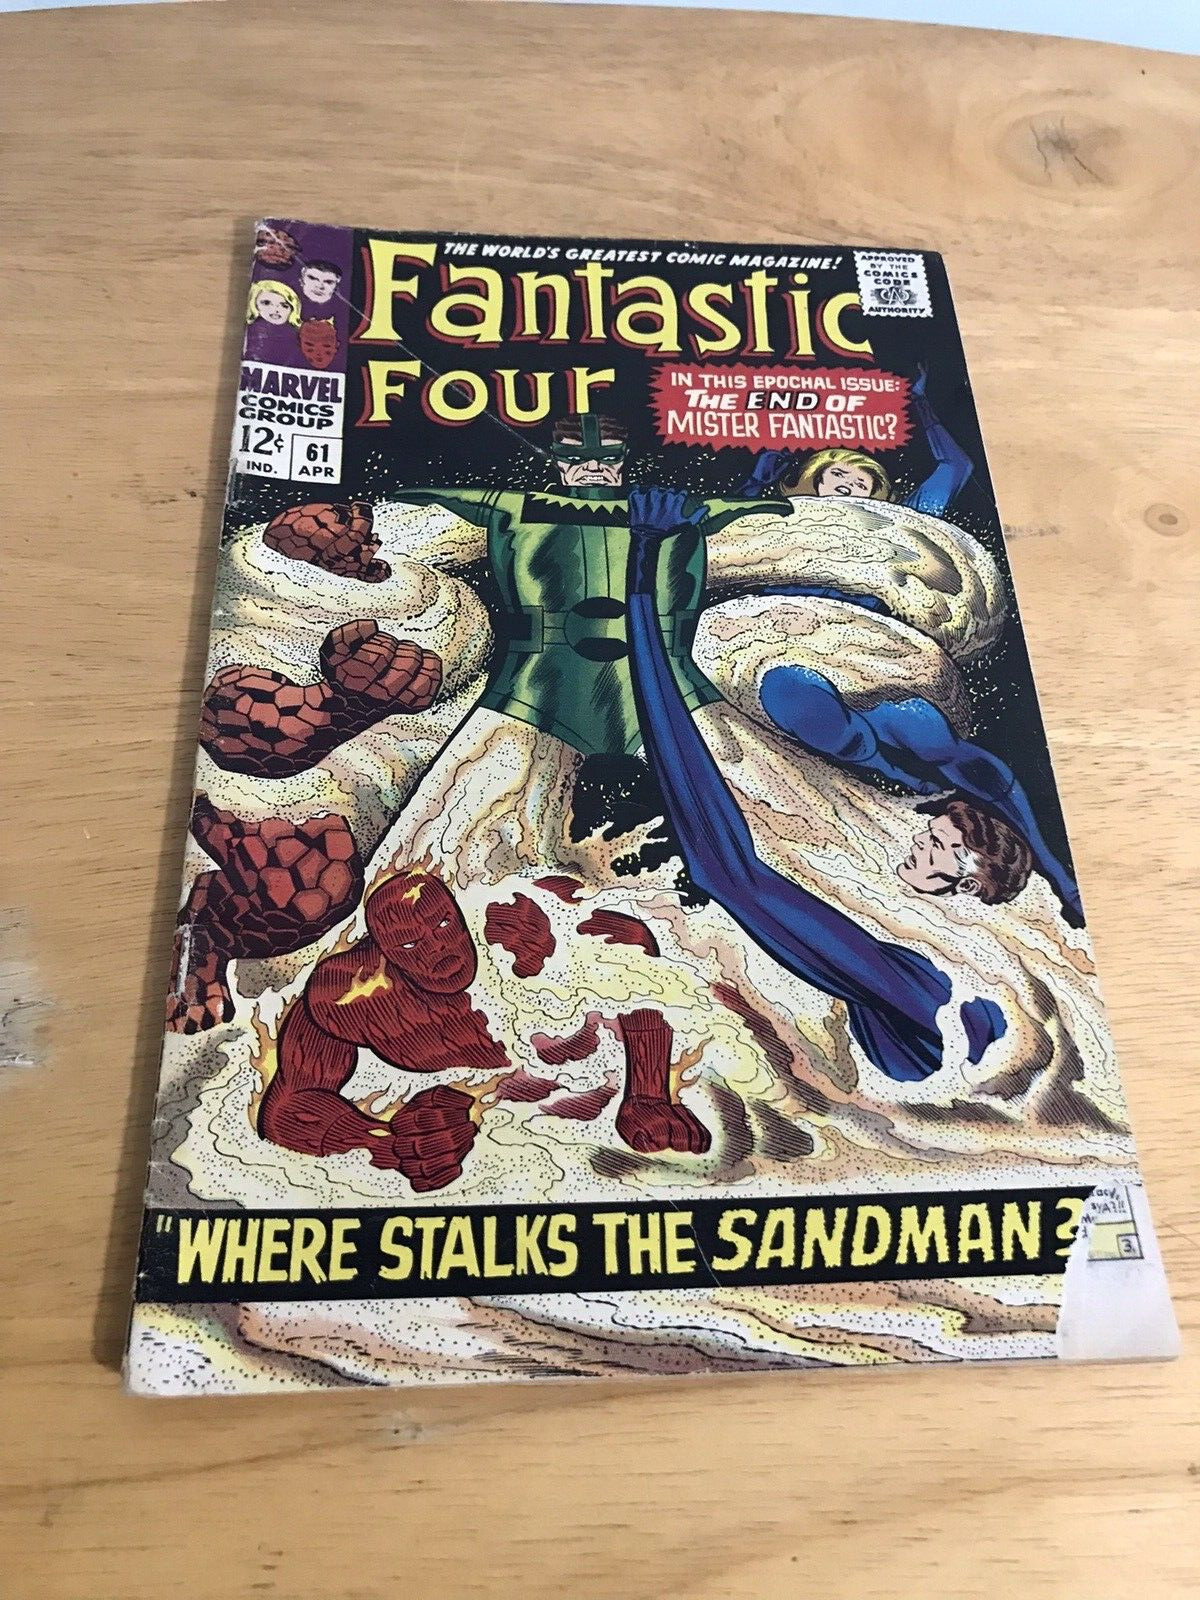 Fantastic Four #61 1967 Appearances of Sandman, Silver Surfer and The Inhumans